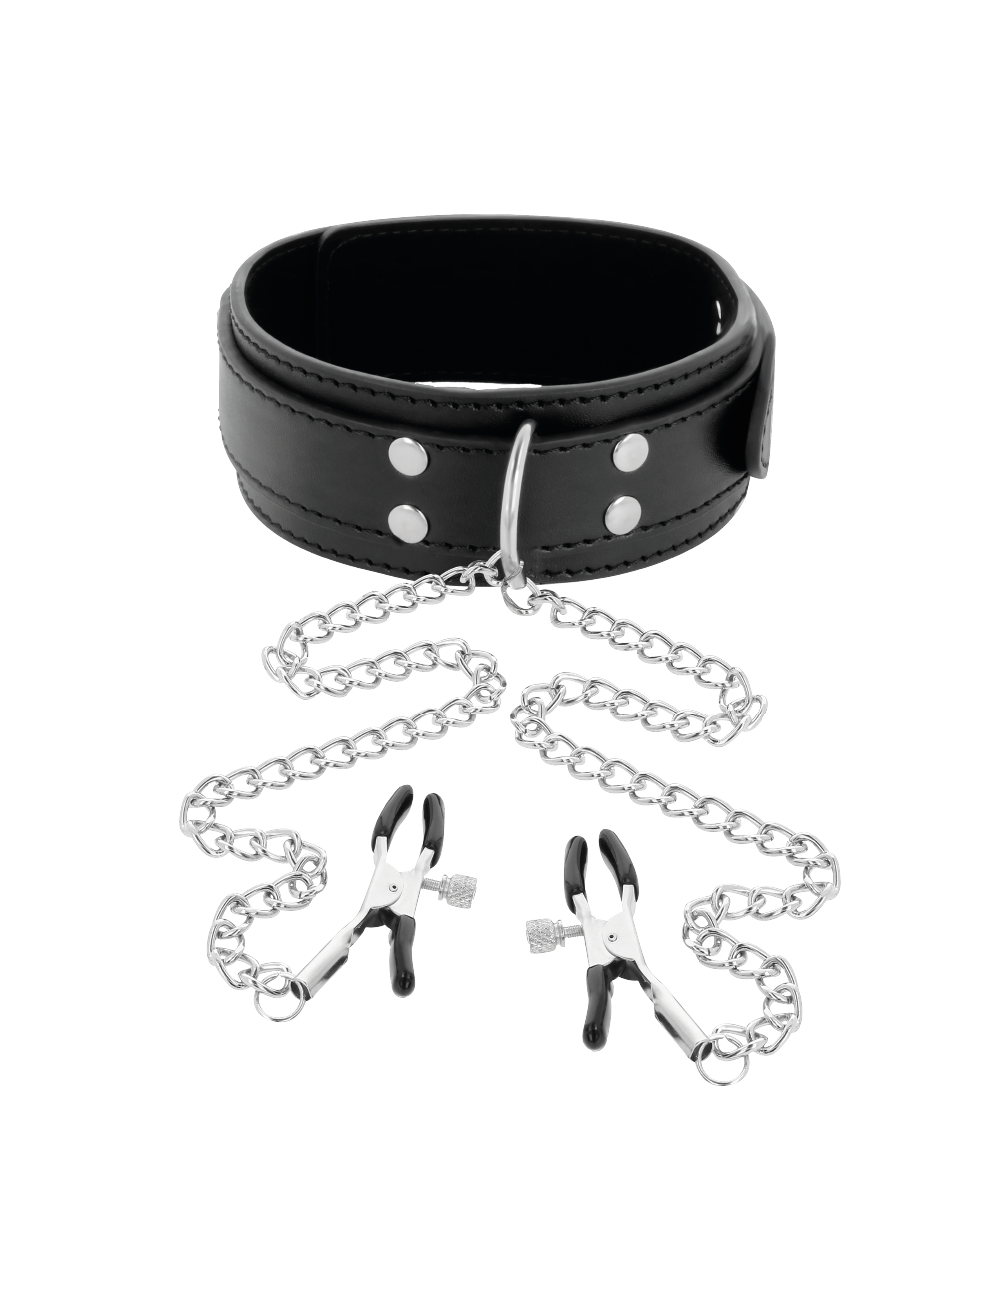 DARKNESS  COLLAR WITH NIPPLE CLAMPS BLACK